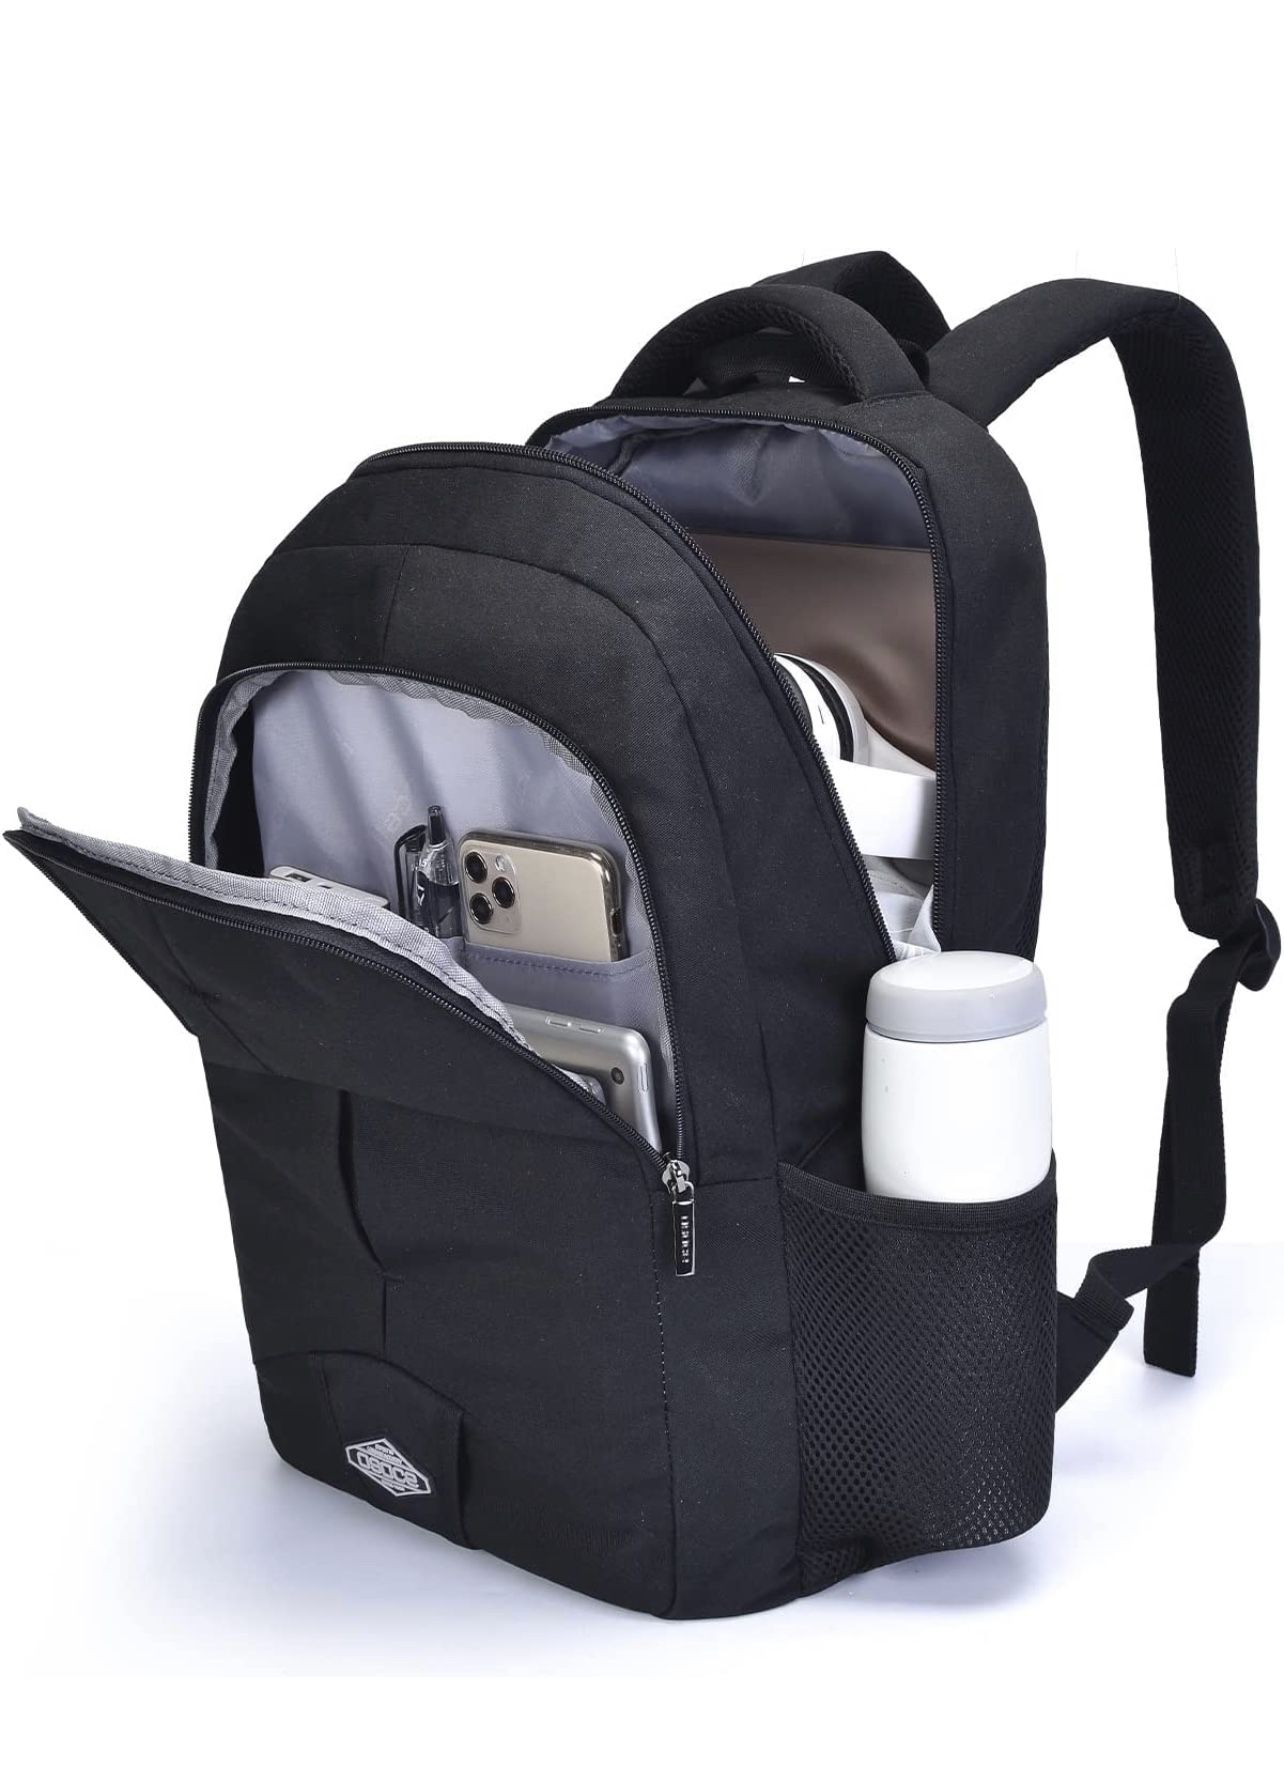  Travel Laptop Backpack Durable Water Resistant College School Fits 15.6 Inch Laptop Notebook